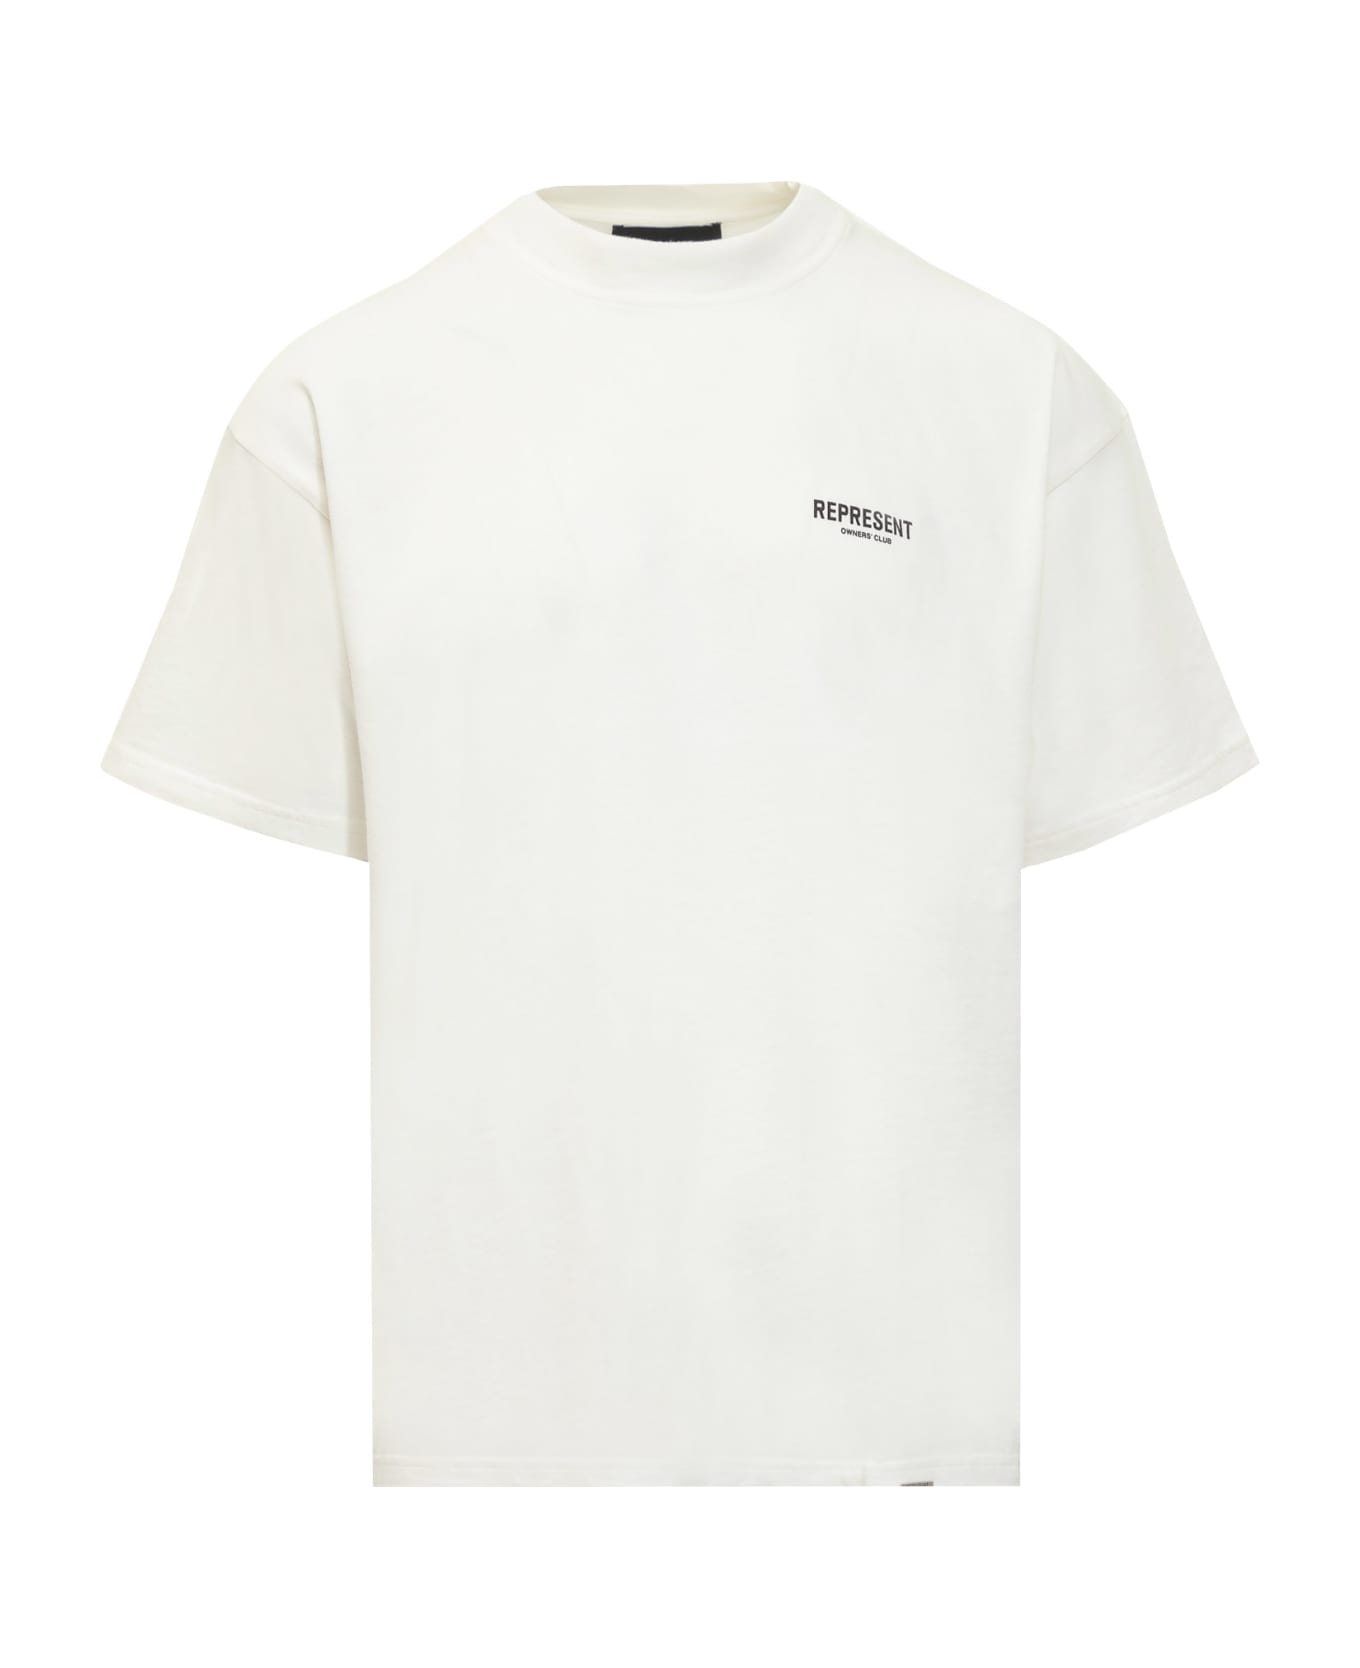 REPRESENT Owners Club T-shirt - FLAT WHITE